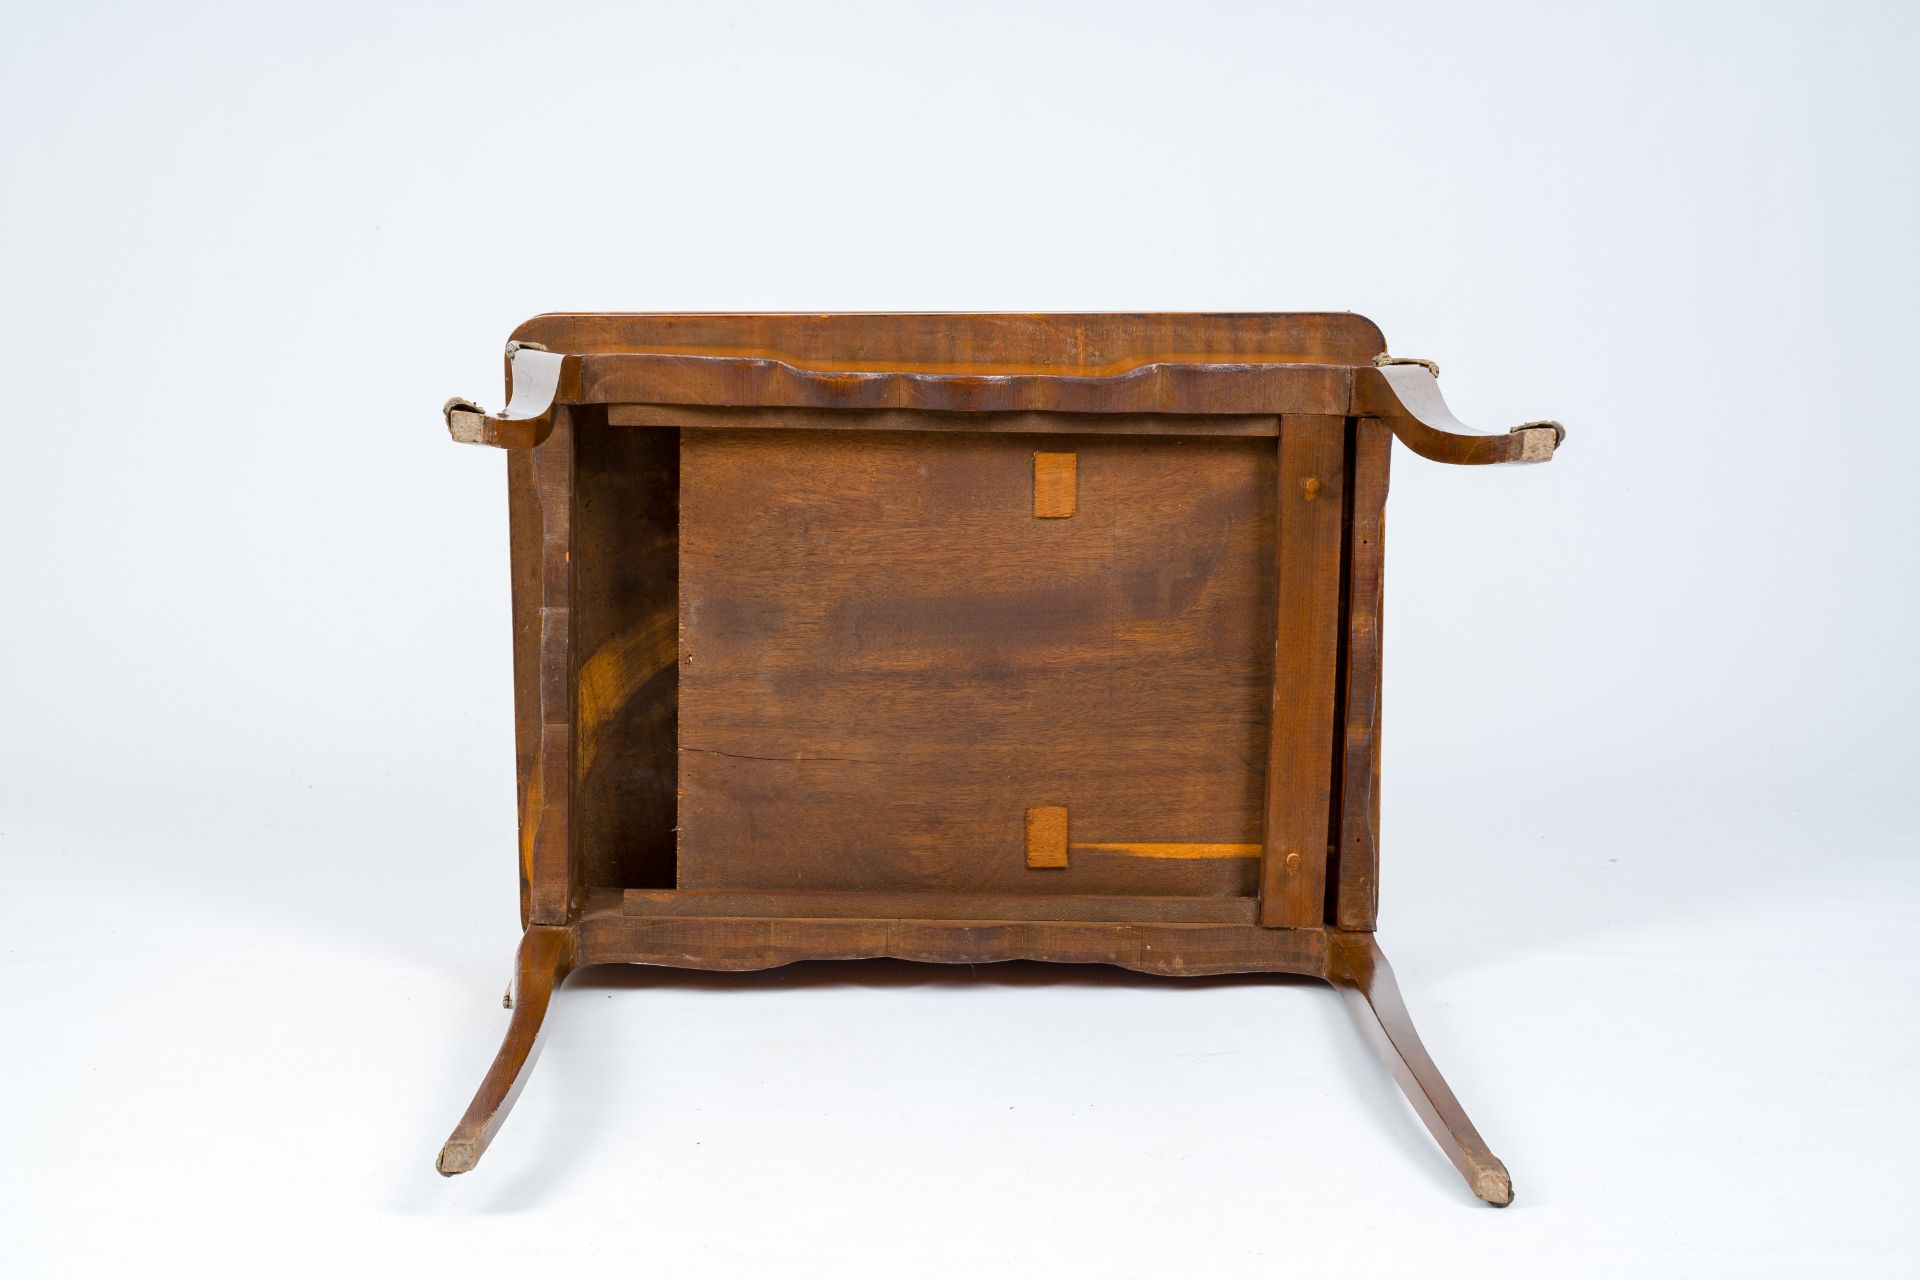 A French bronze mounted wood game table with marquetry top, 19th/20th C. - Image 10 of 10